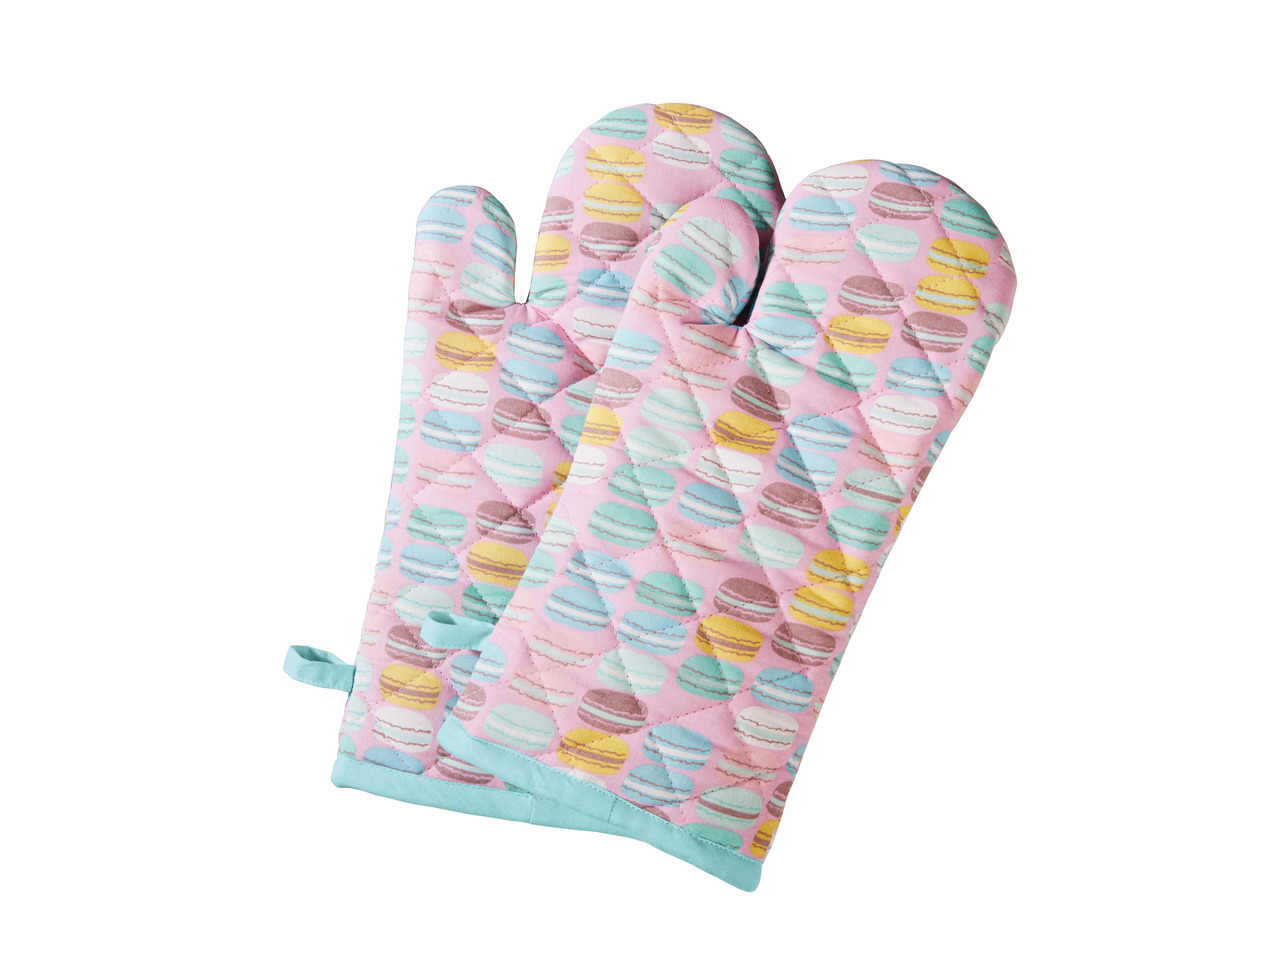 Ernesto 2 Oven Gloves or Double Oven Glove1